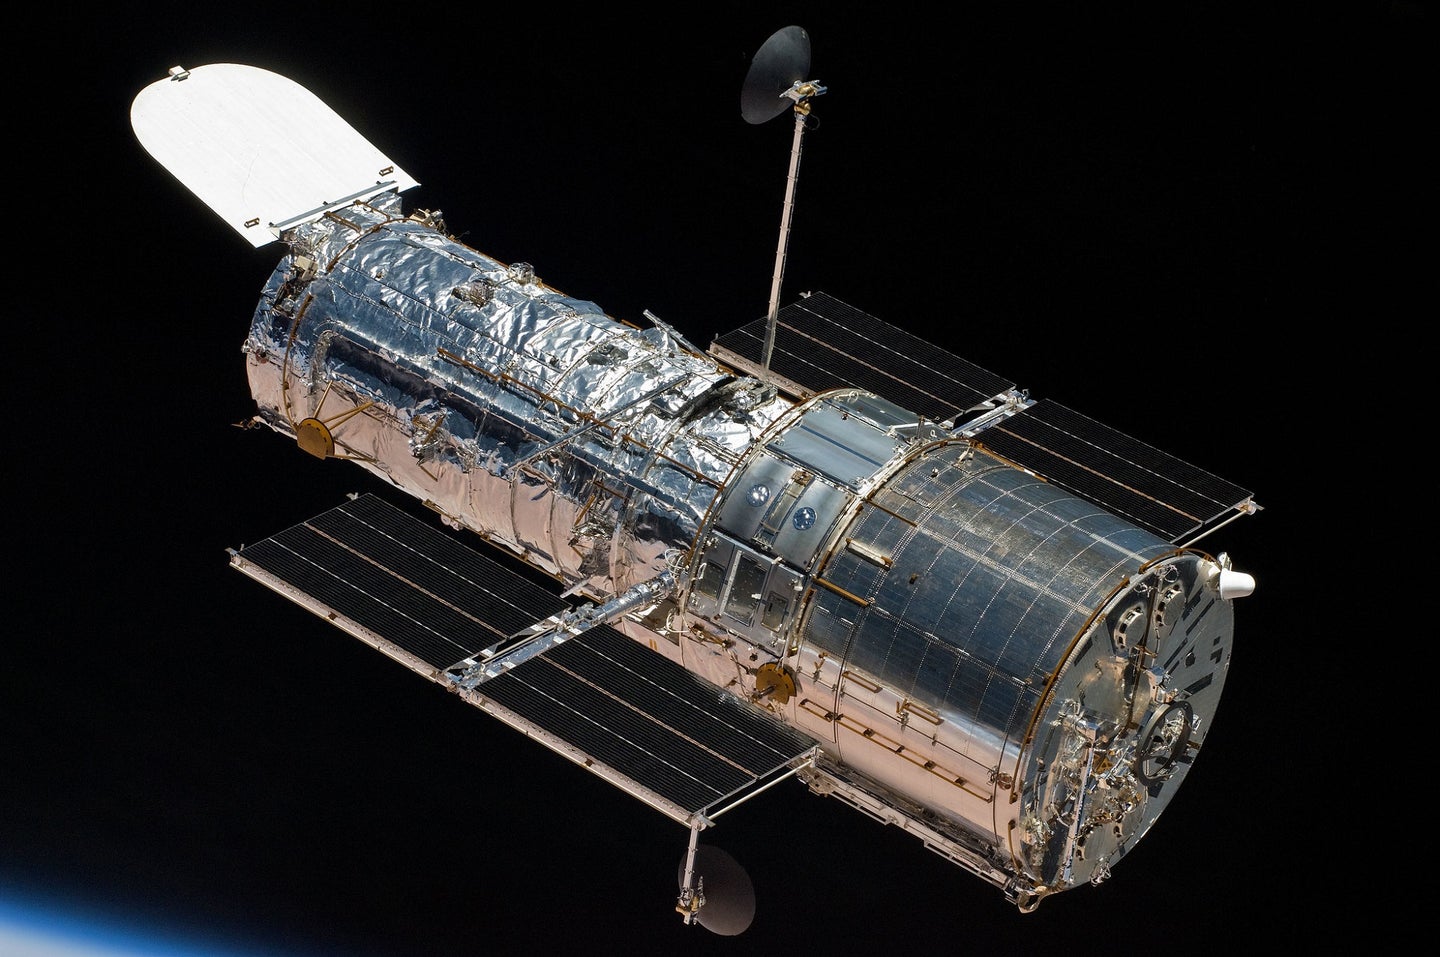 Hubble Space Telescope in orbit while photographing distant galaxies and invisible black holes